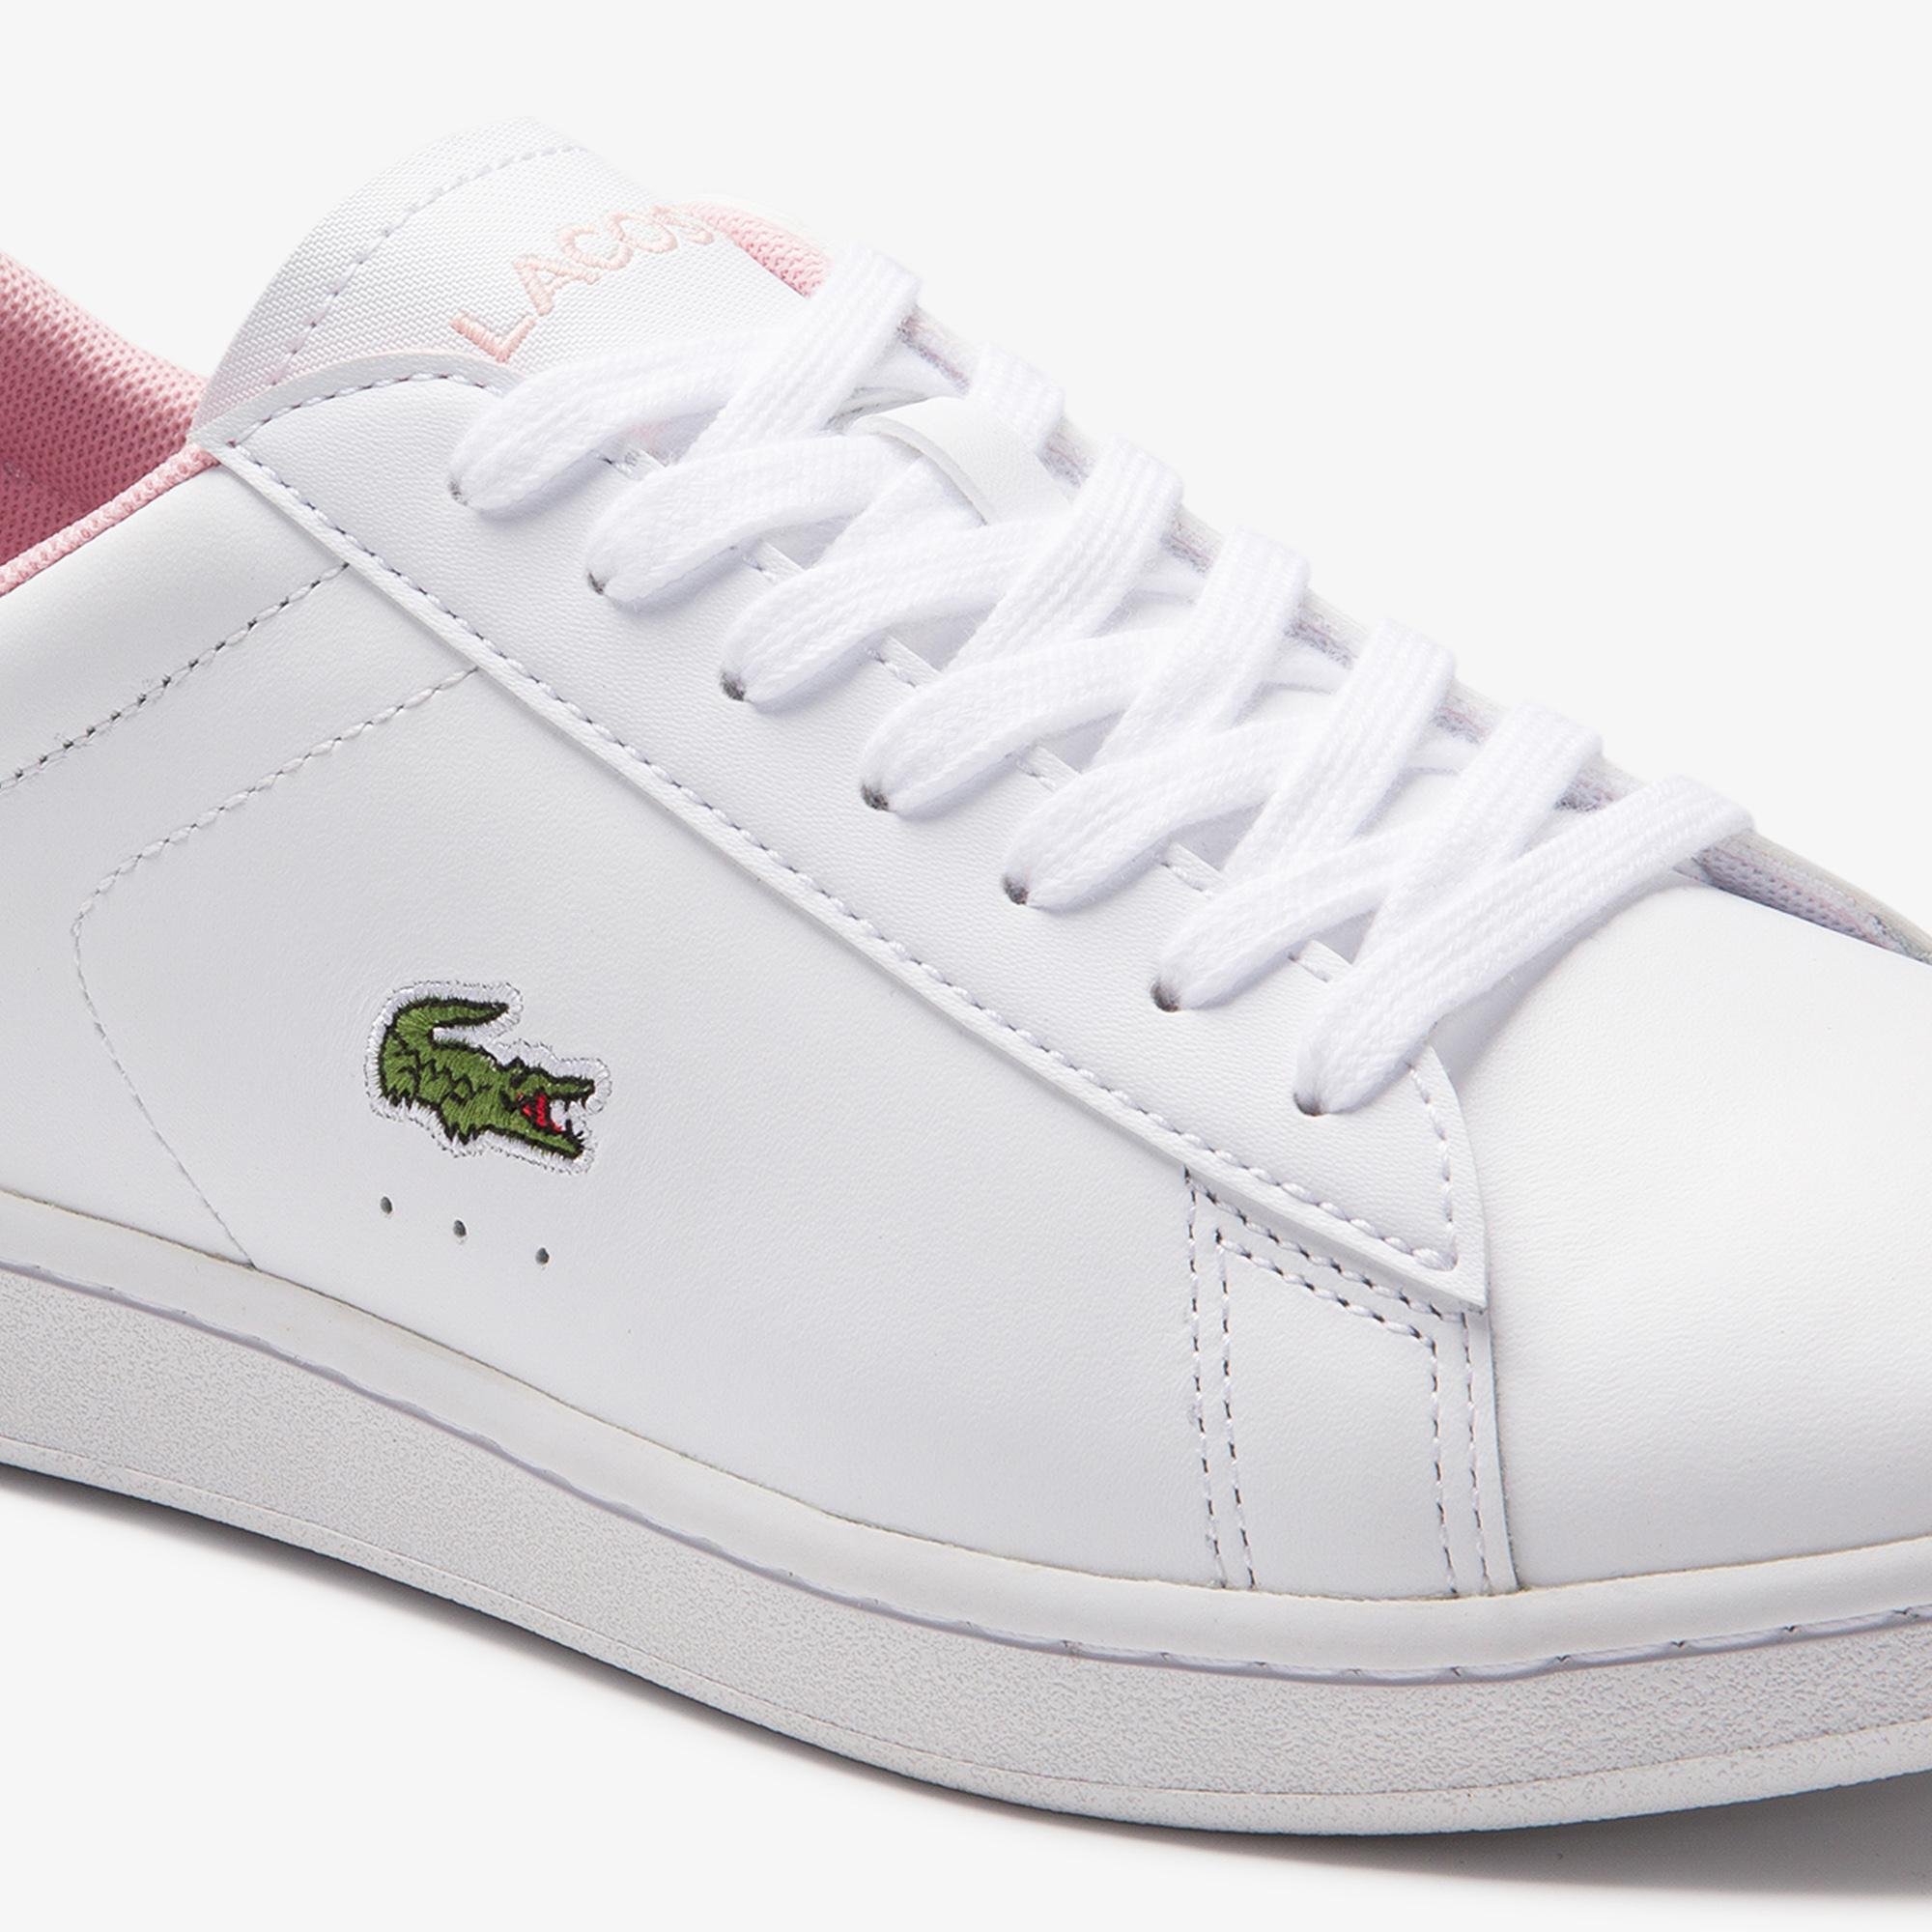 Lacoste Women's Carnaby Evo Leather and Synthetic Sneakers